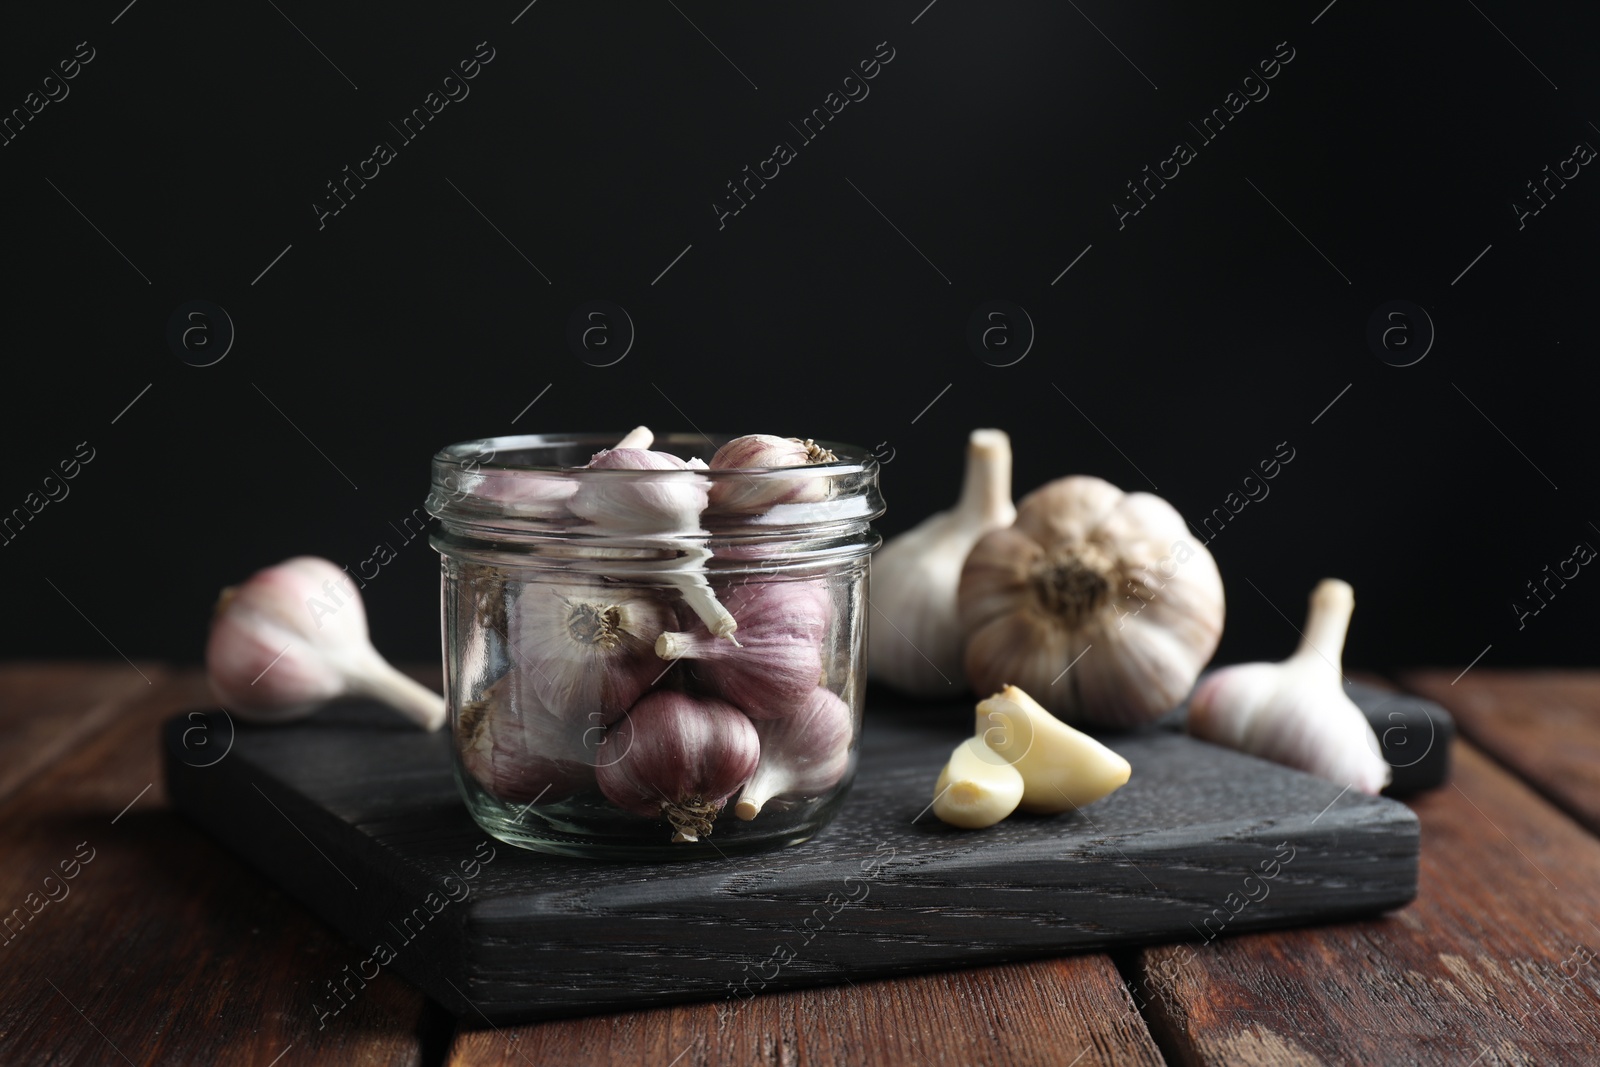 Photo of Many fresh garlic bulbs on wooden table against black background